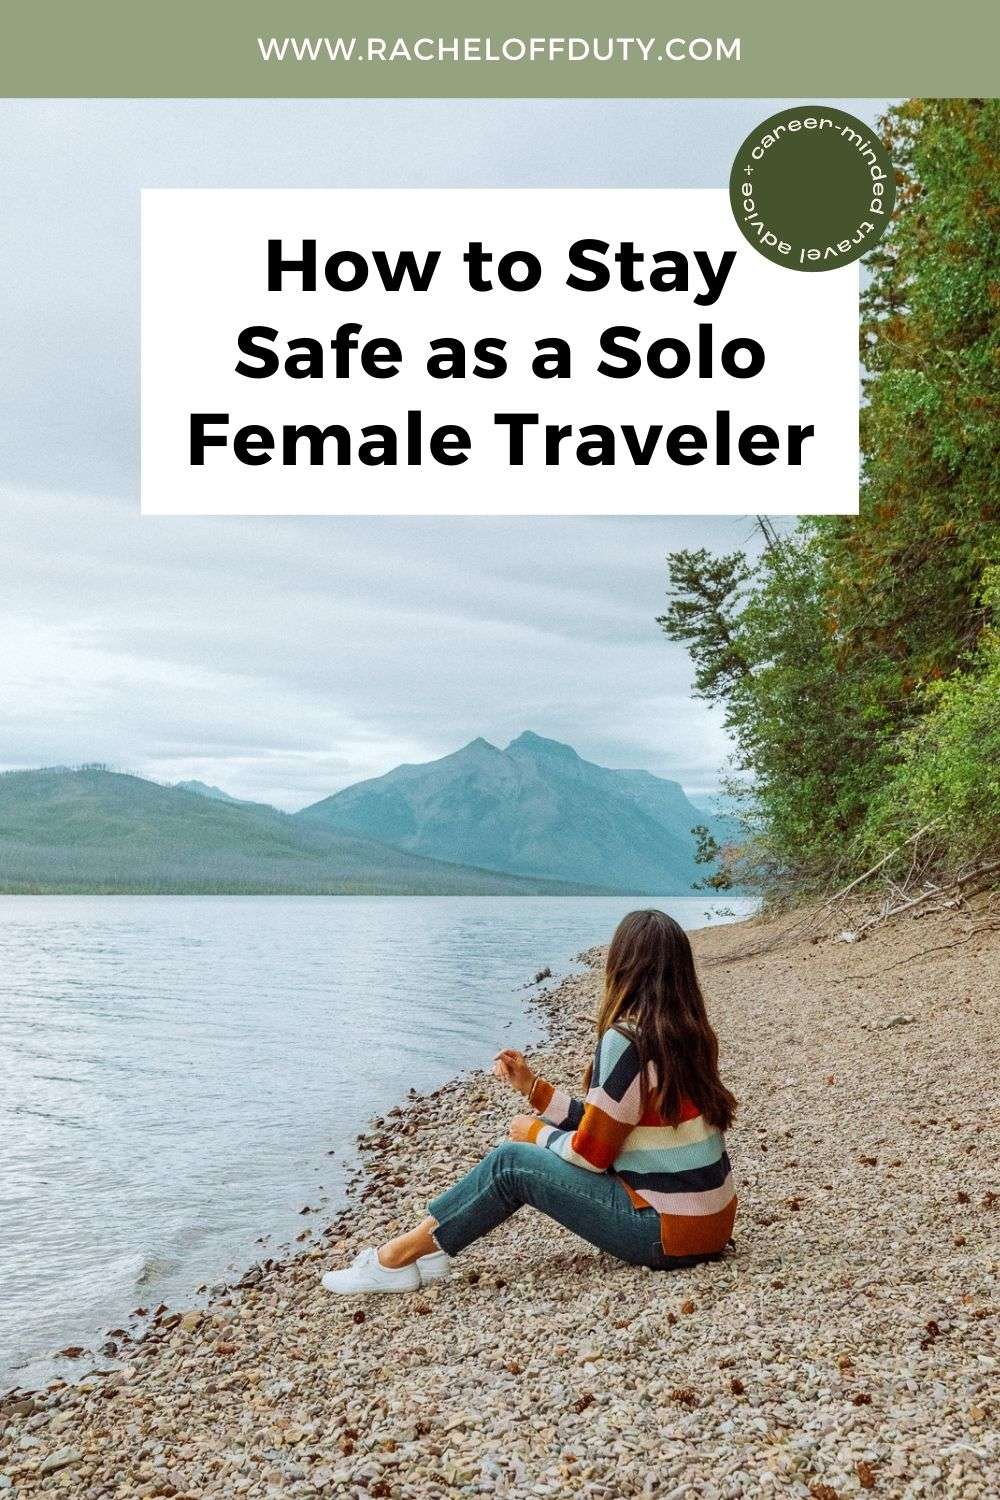 Rachel Off Duty: Tips to stay safe as a solo female traveler